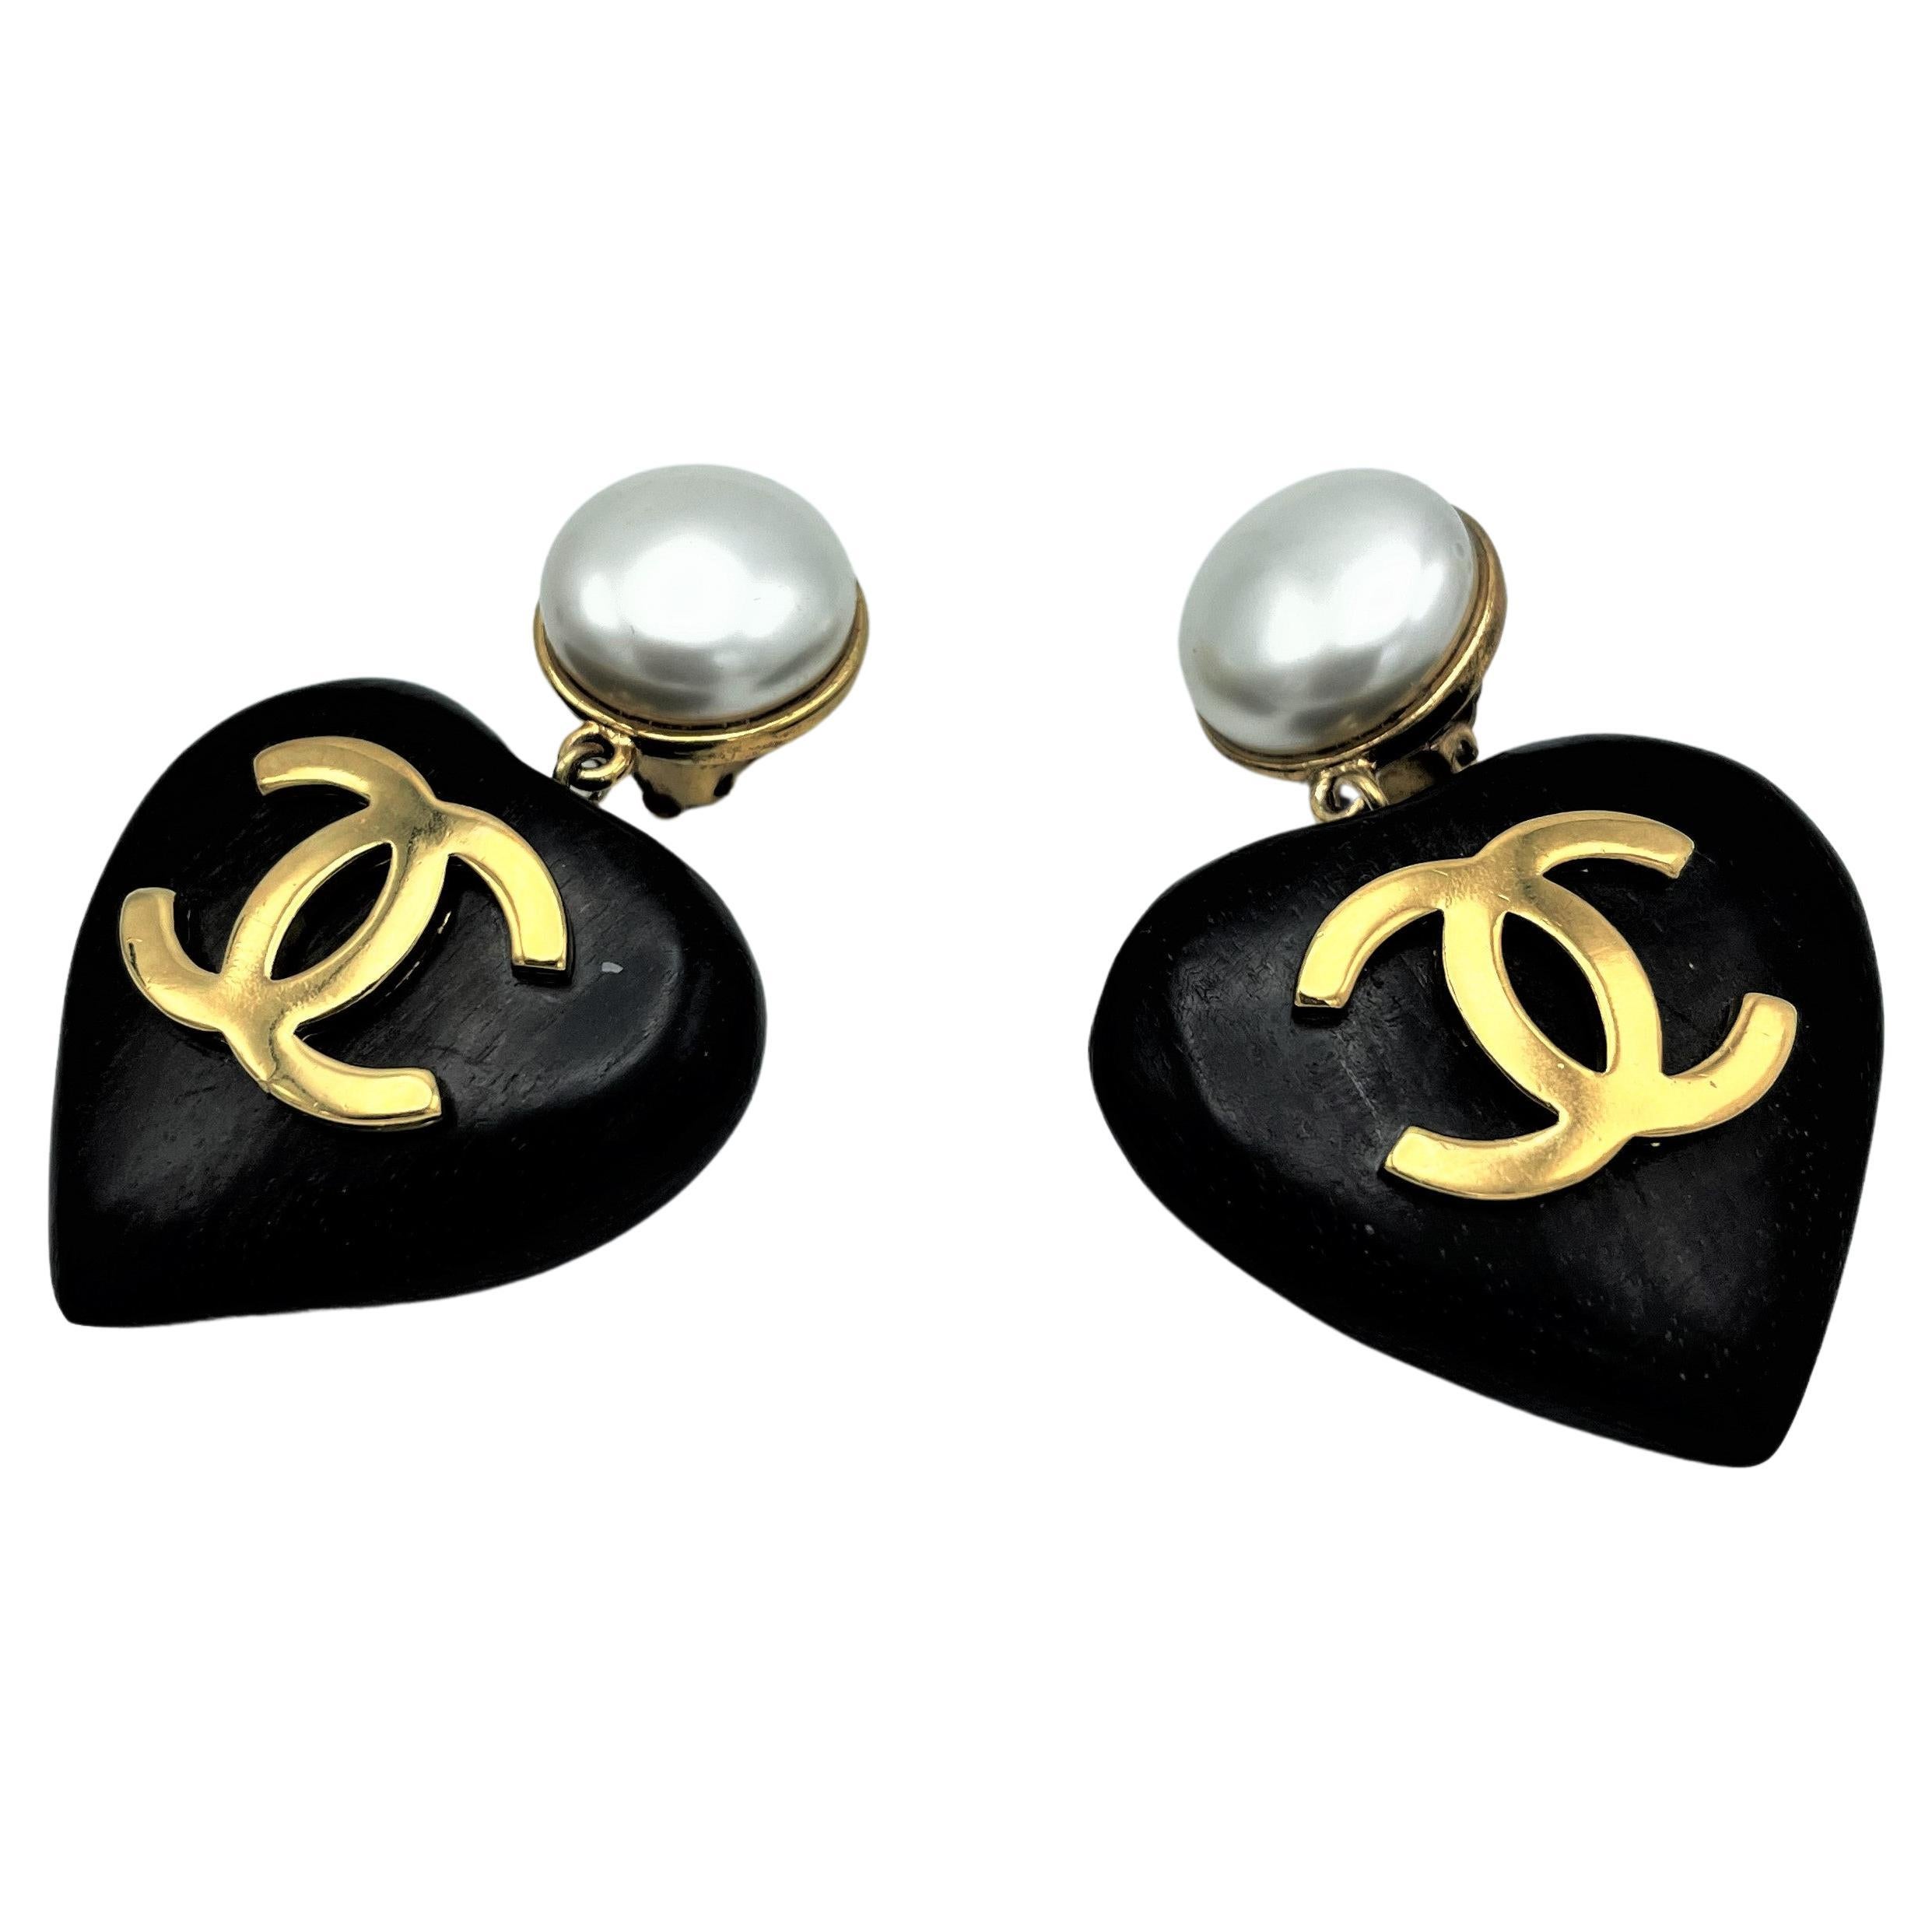 These are the most wanted vintage CHANEL wood heart clip-on earring!
Very rare and iconic ear clips with a large faux pearl, hanging from it a large black ebony heart with 2 attached large CCs signed 2CC8. This earrings are designed from Victoire de